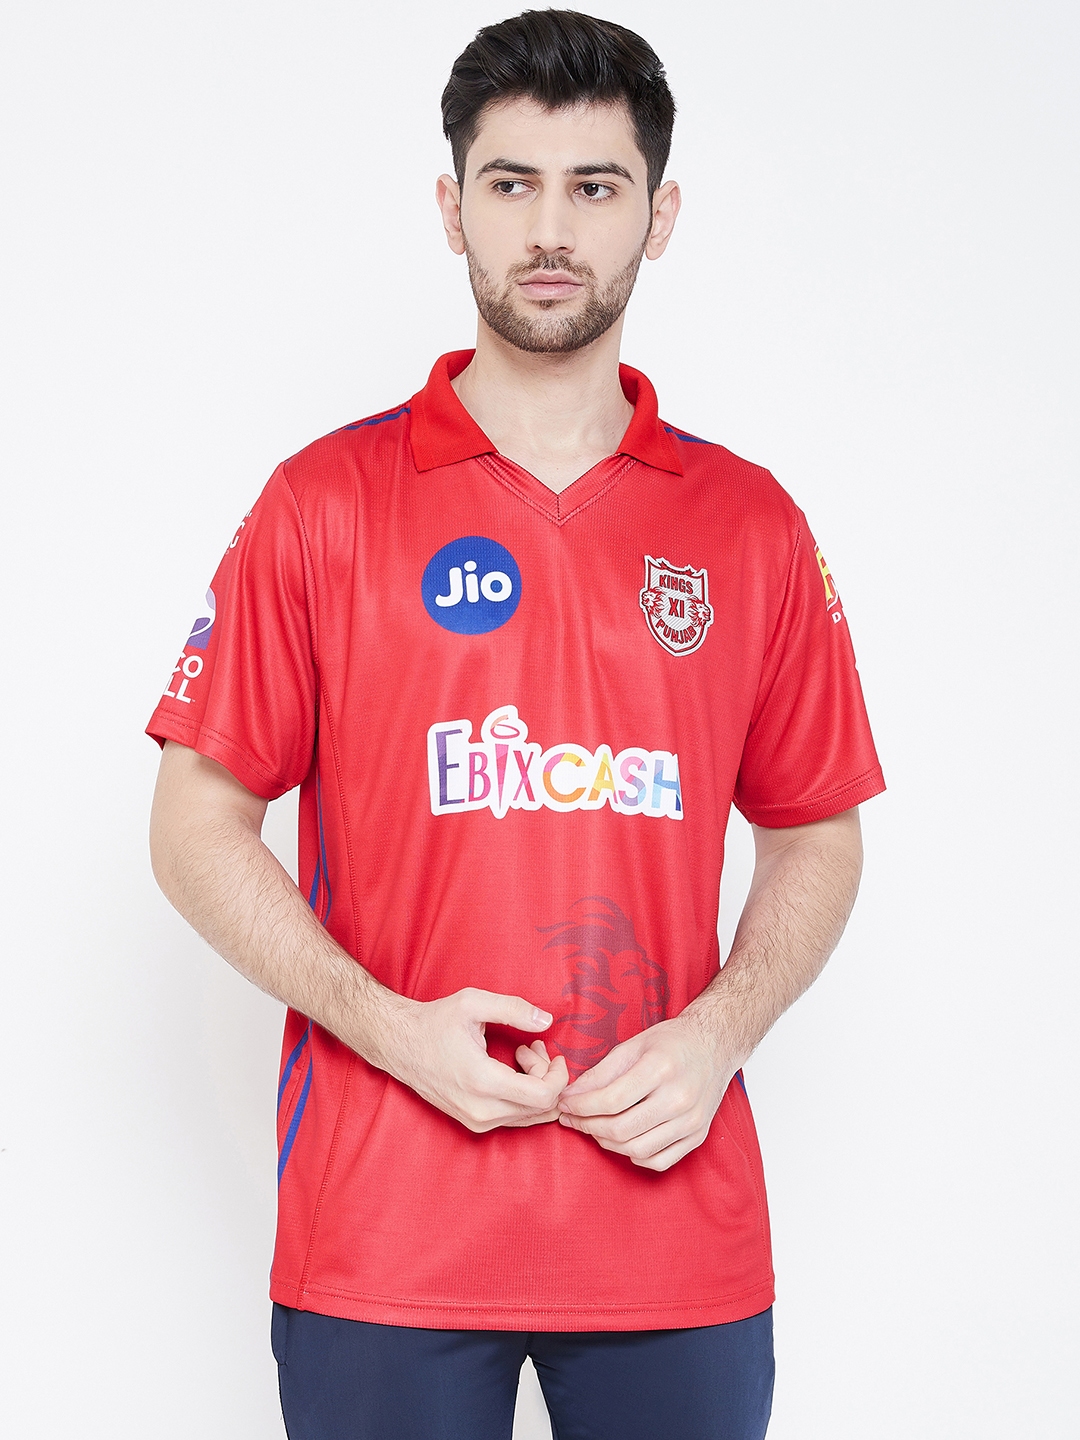 KXIP OFFICIAL PLAYER JERSEY ED. 2020 - T10 Sports